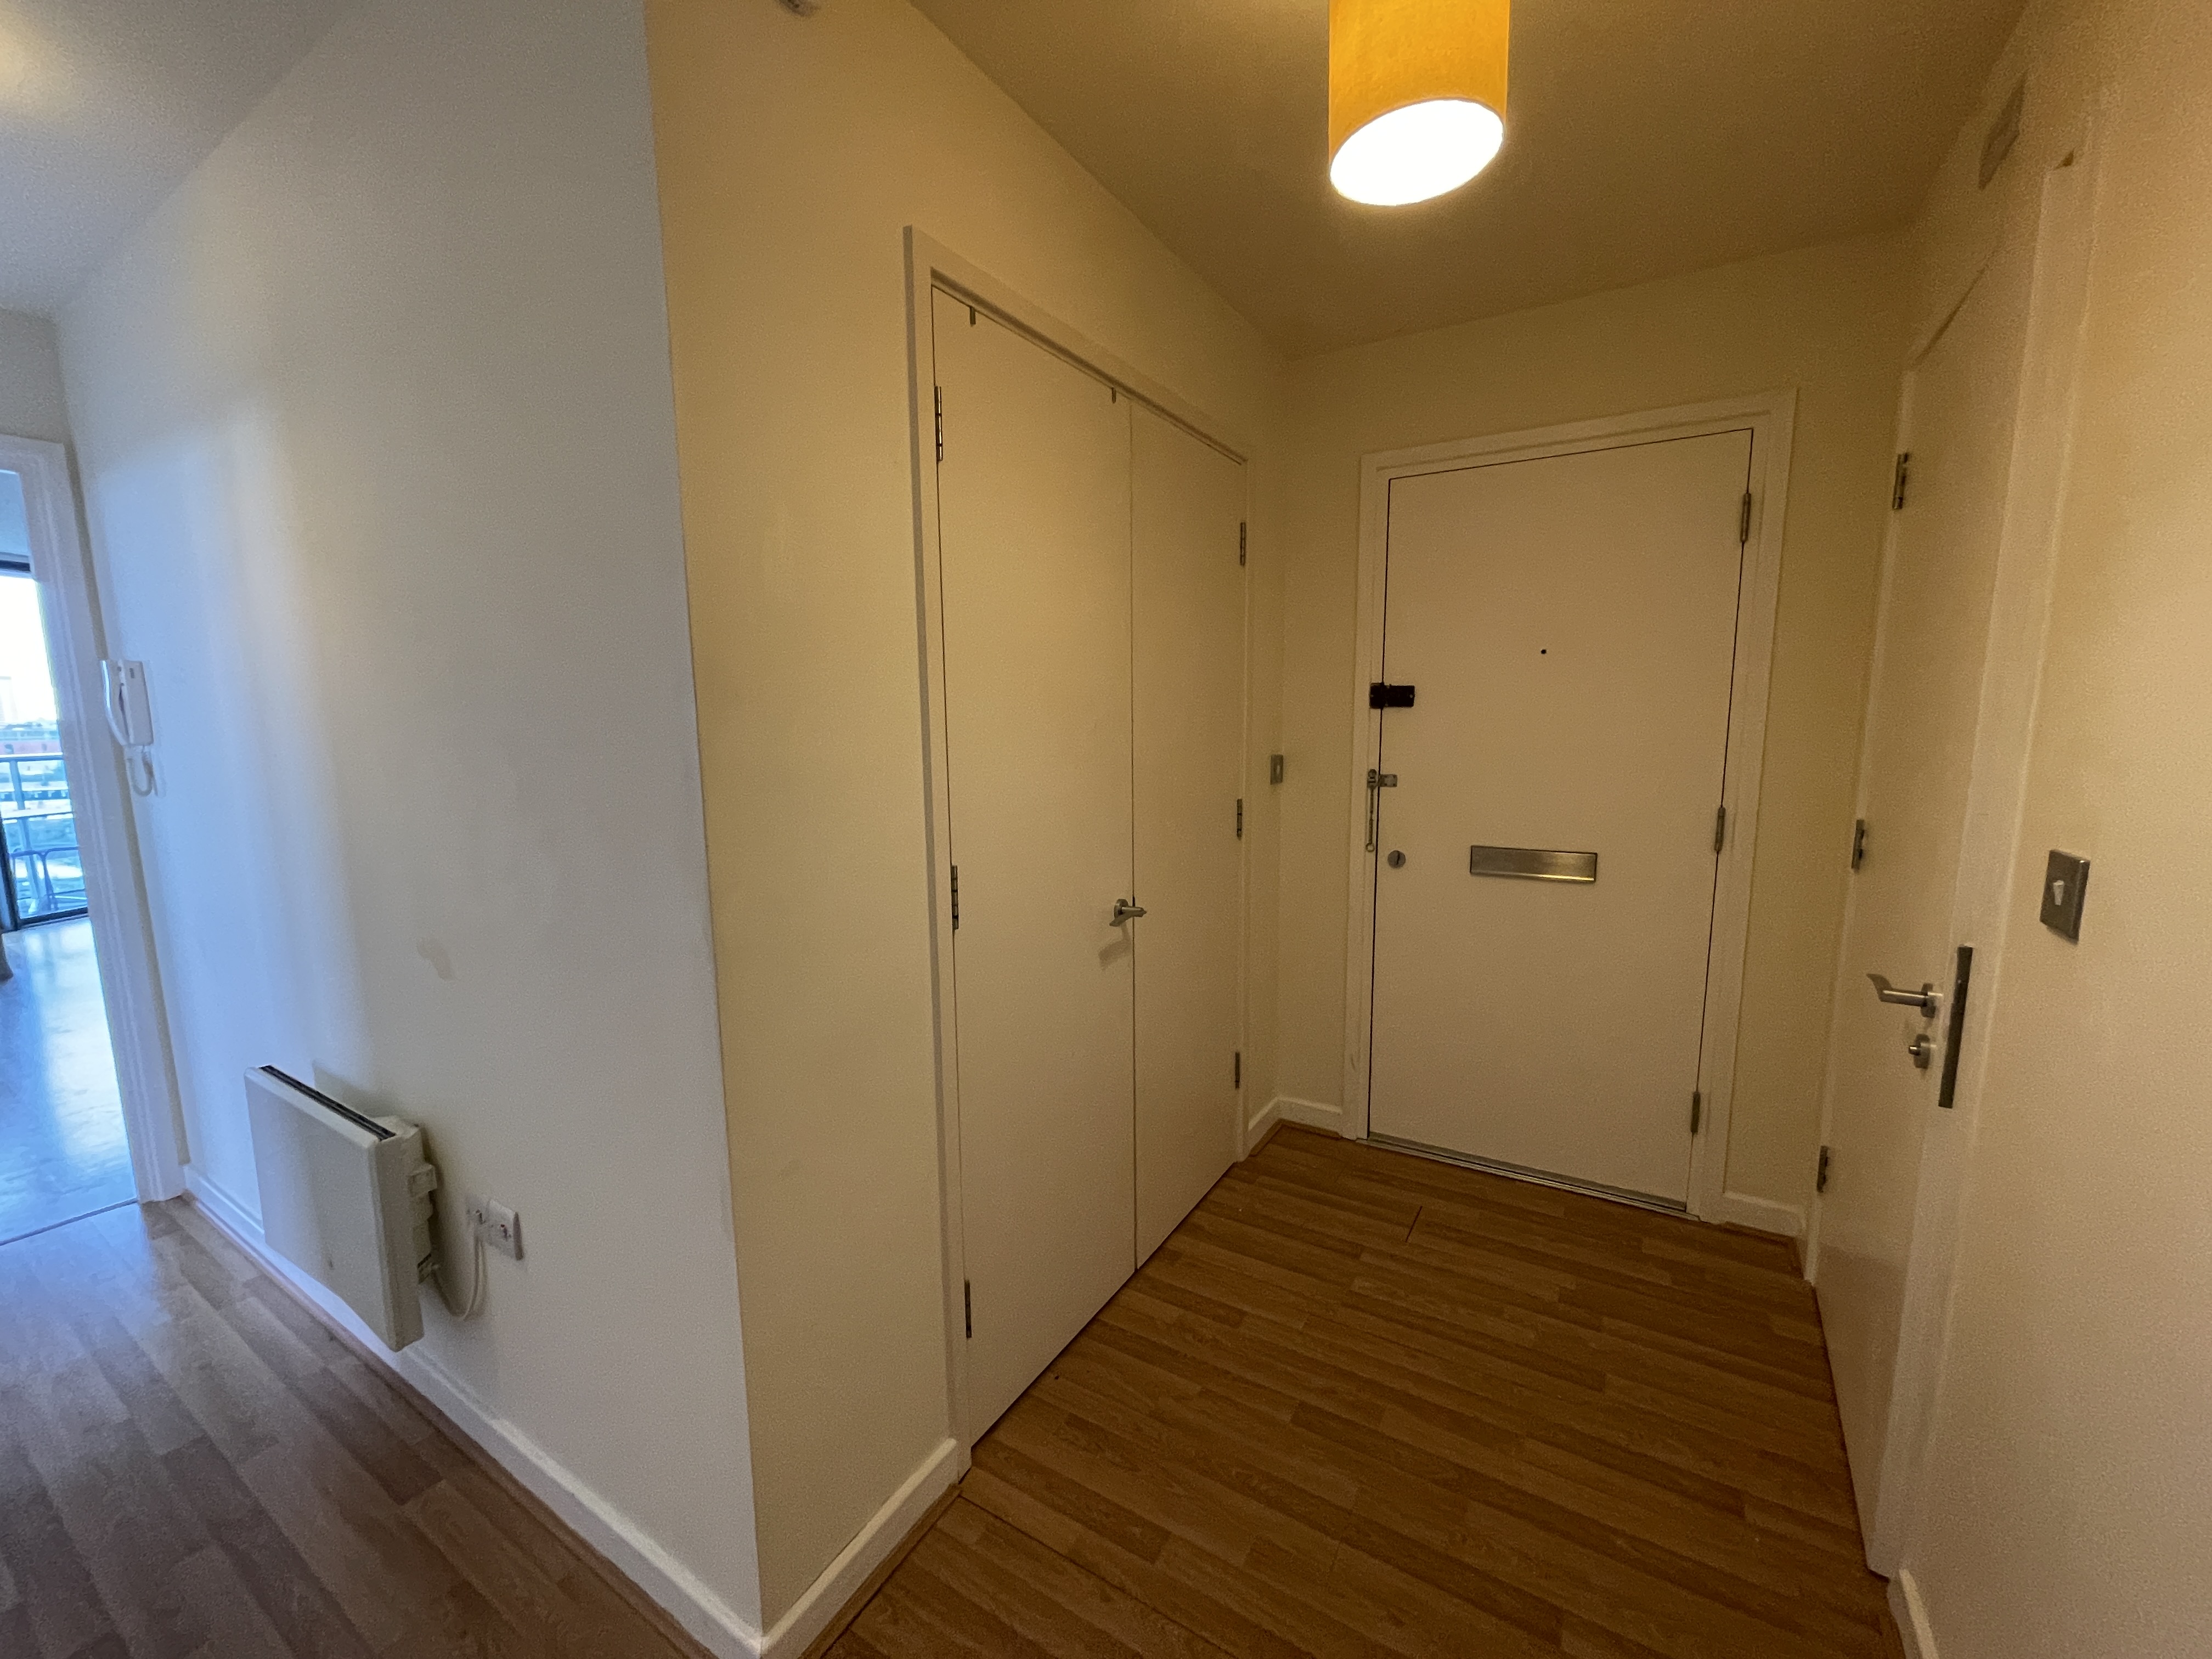 2 bed House Share for rent in Stratford. From PropertyLoop